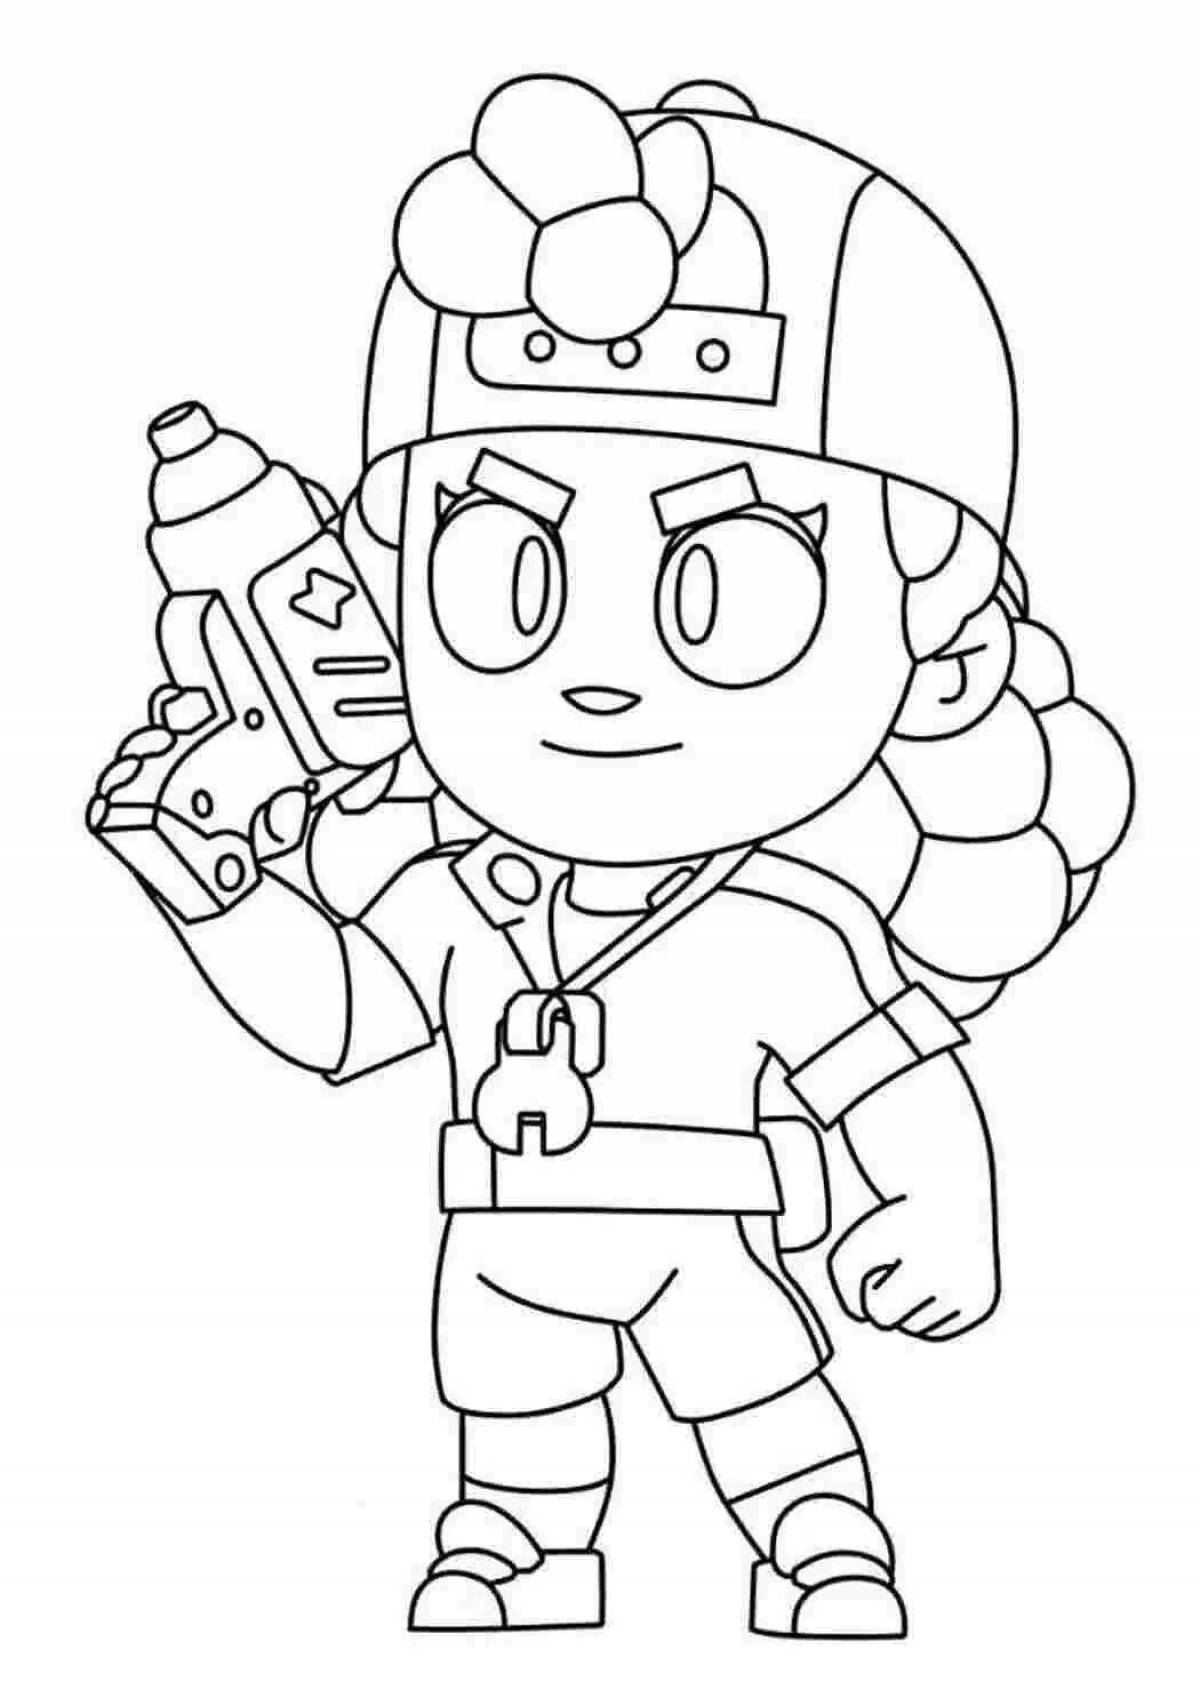 Sam from brawl stars animated coloring page